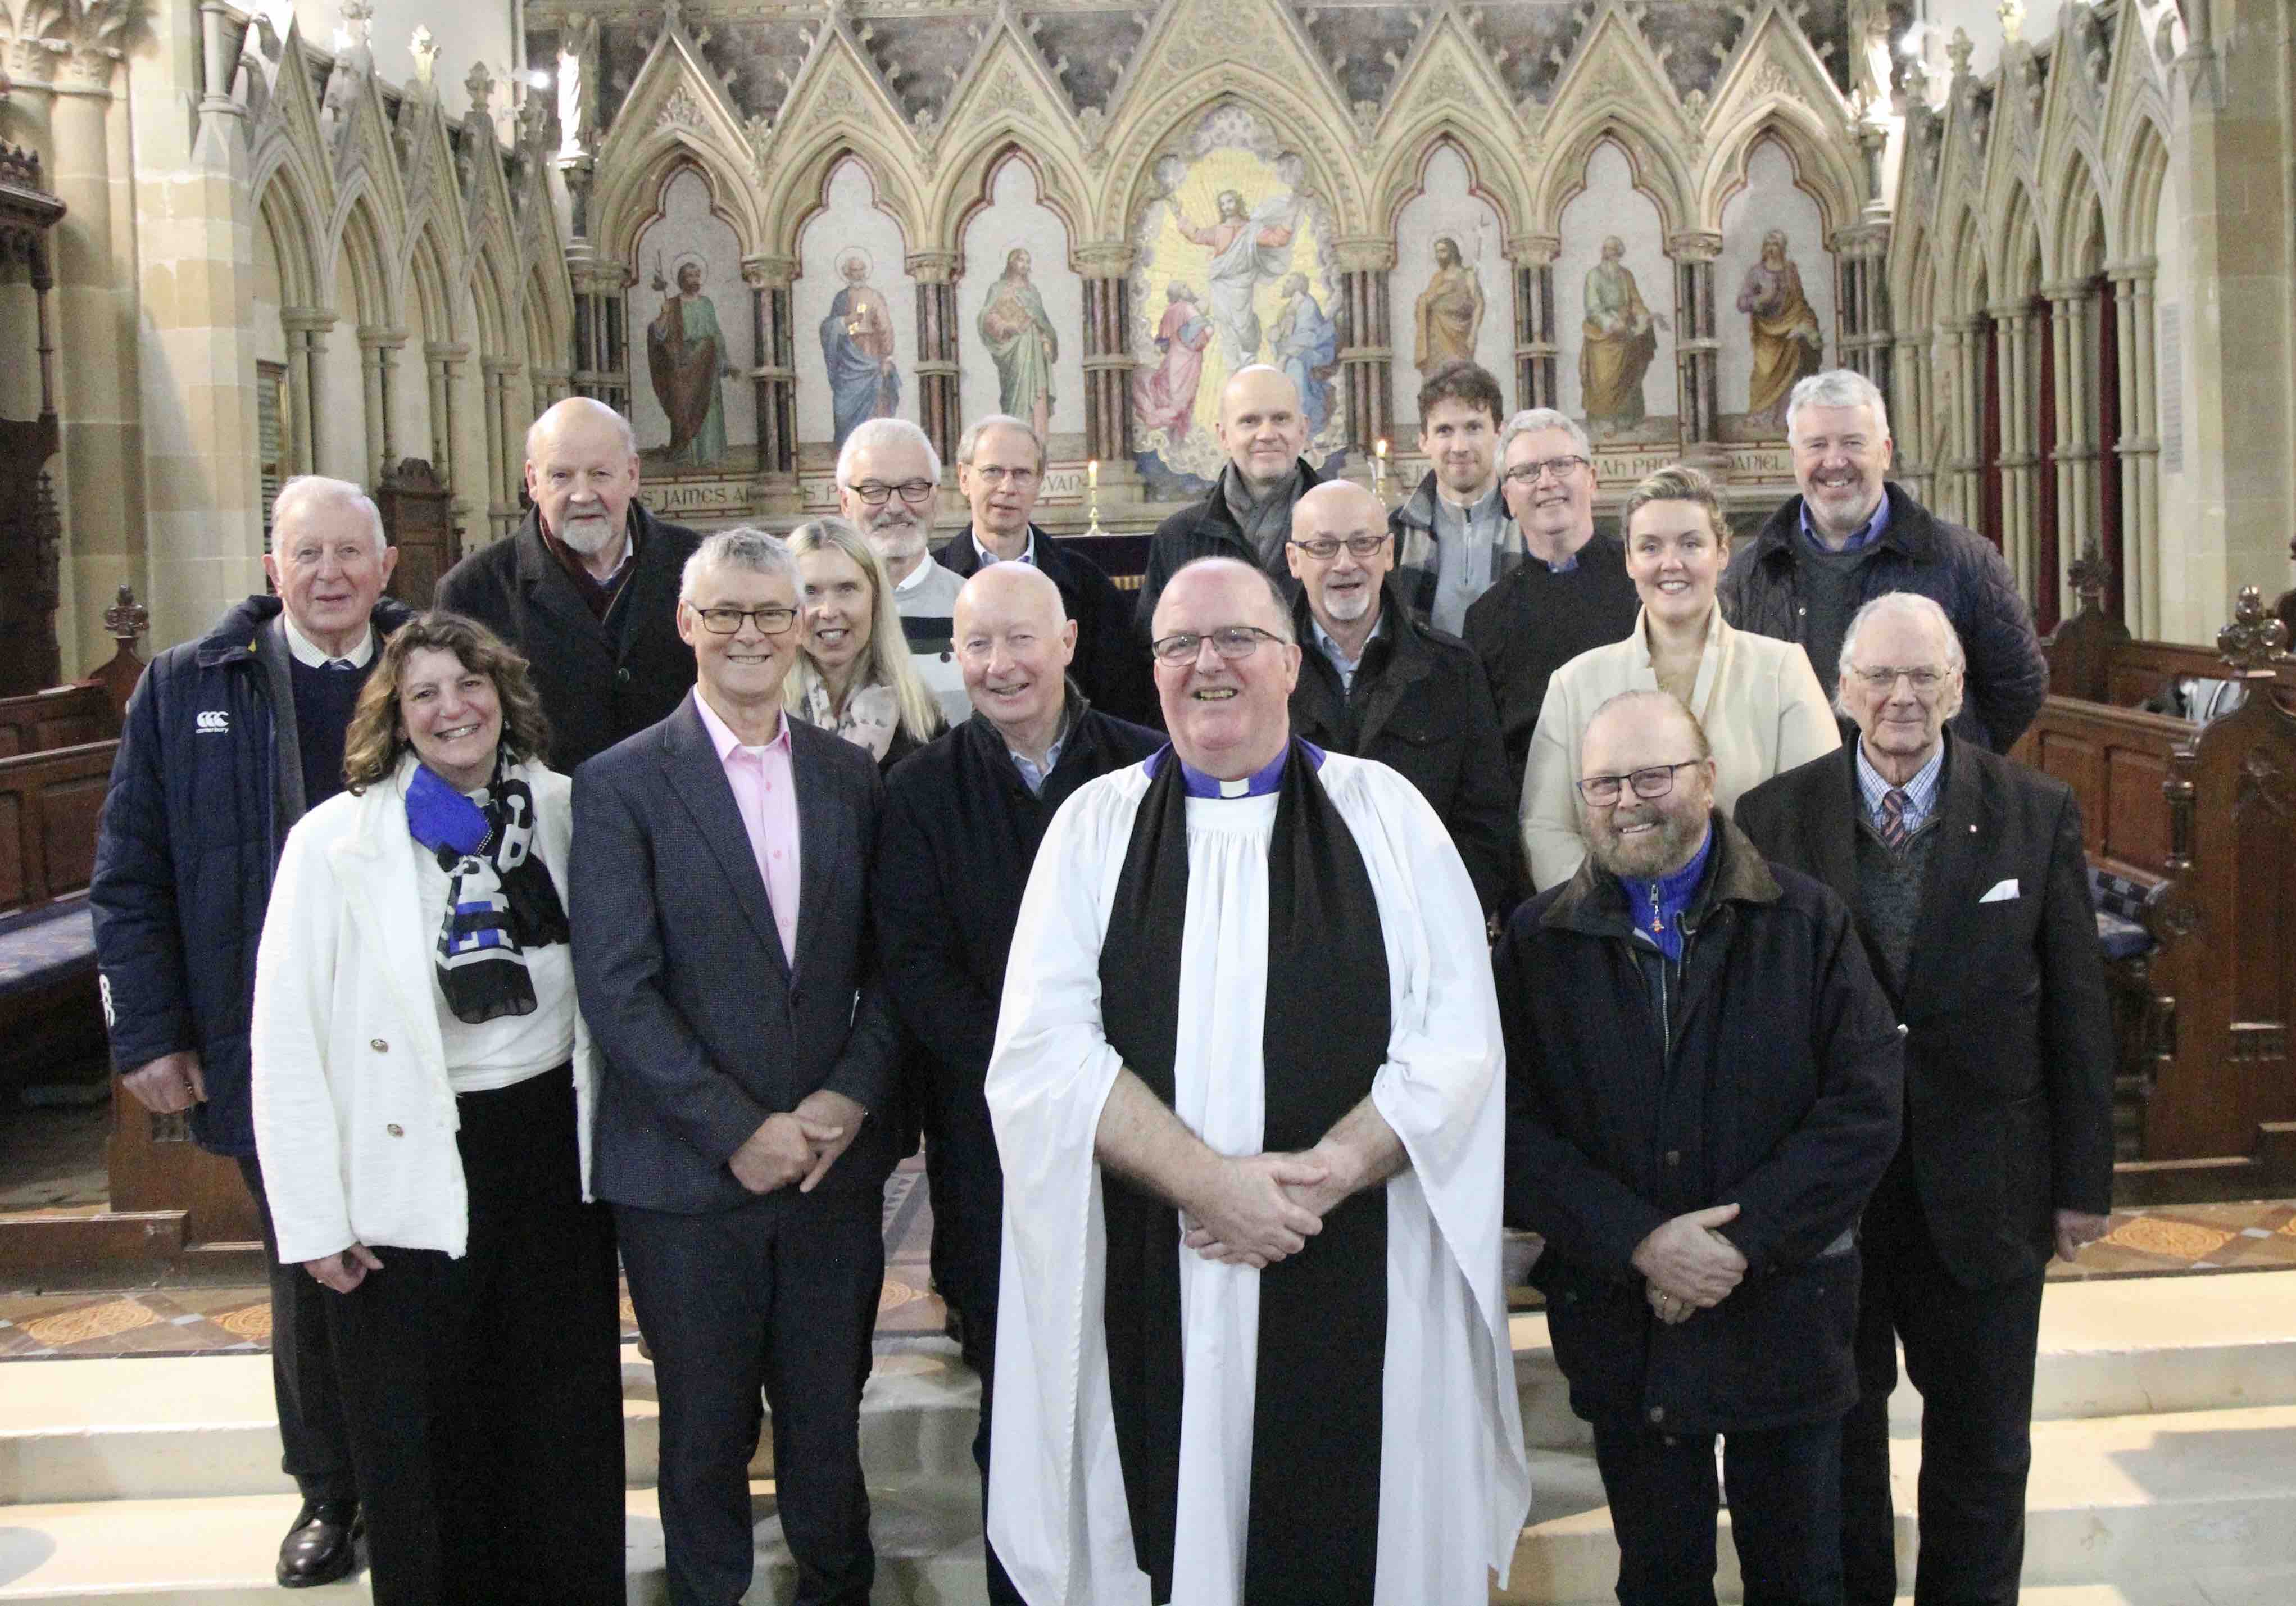 The Revd Baden Stanley with the Select Vestry and trustees of Christ Church Bray.